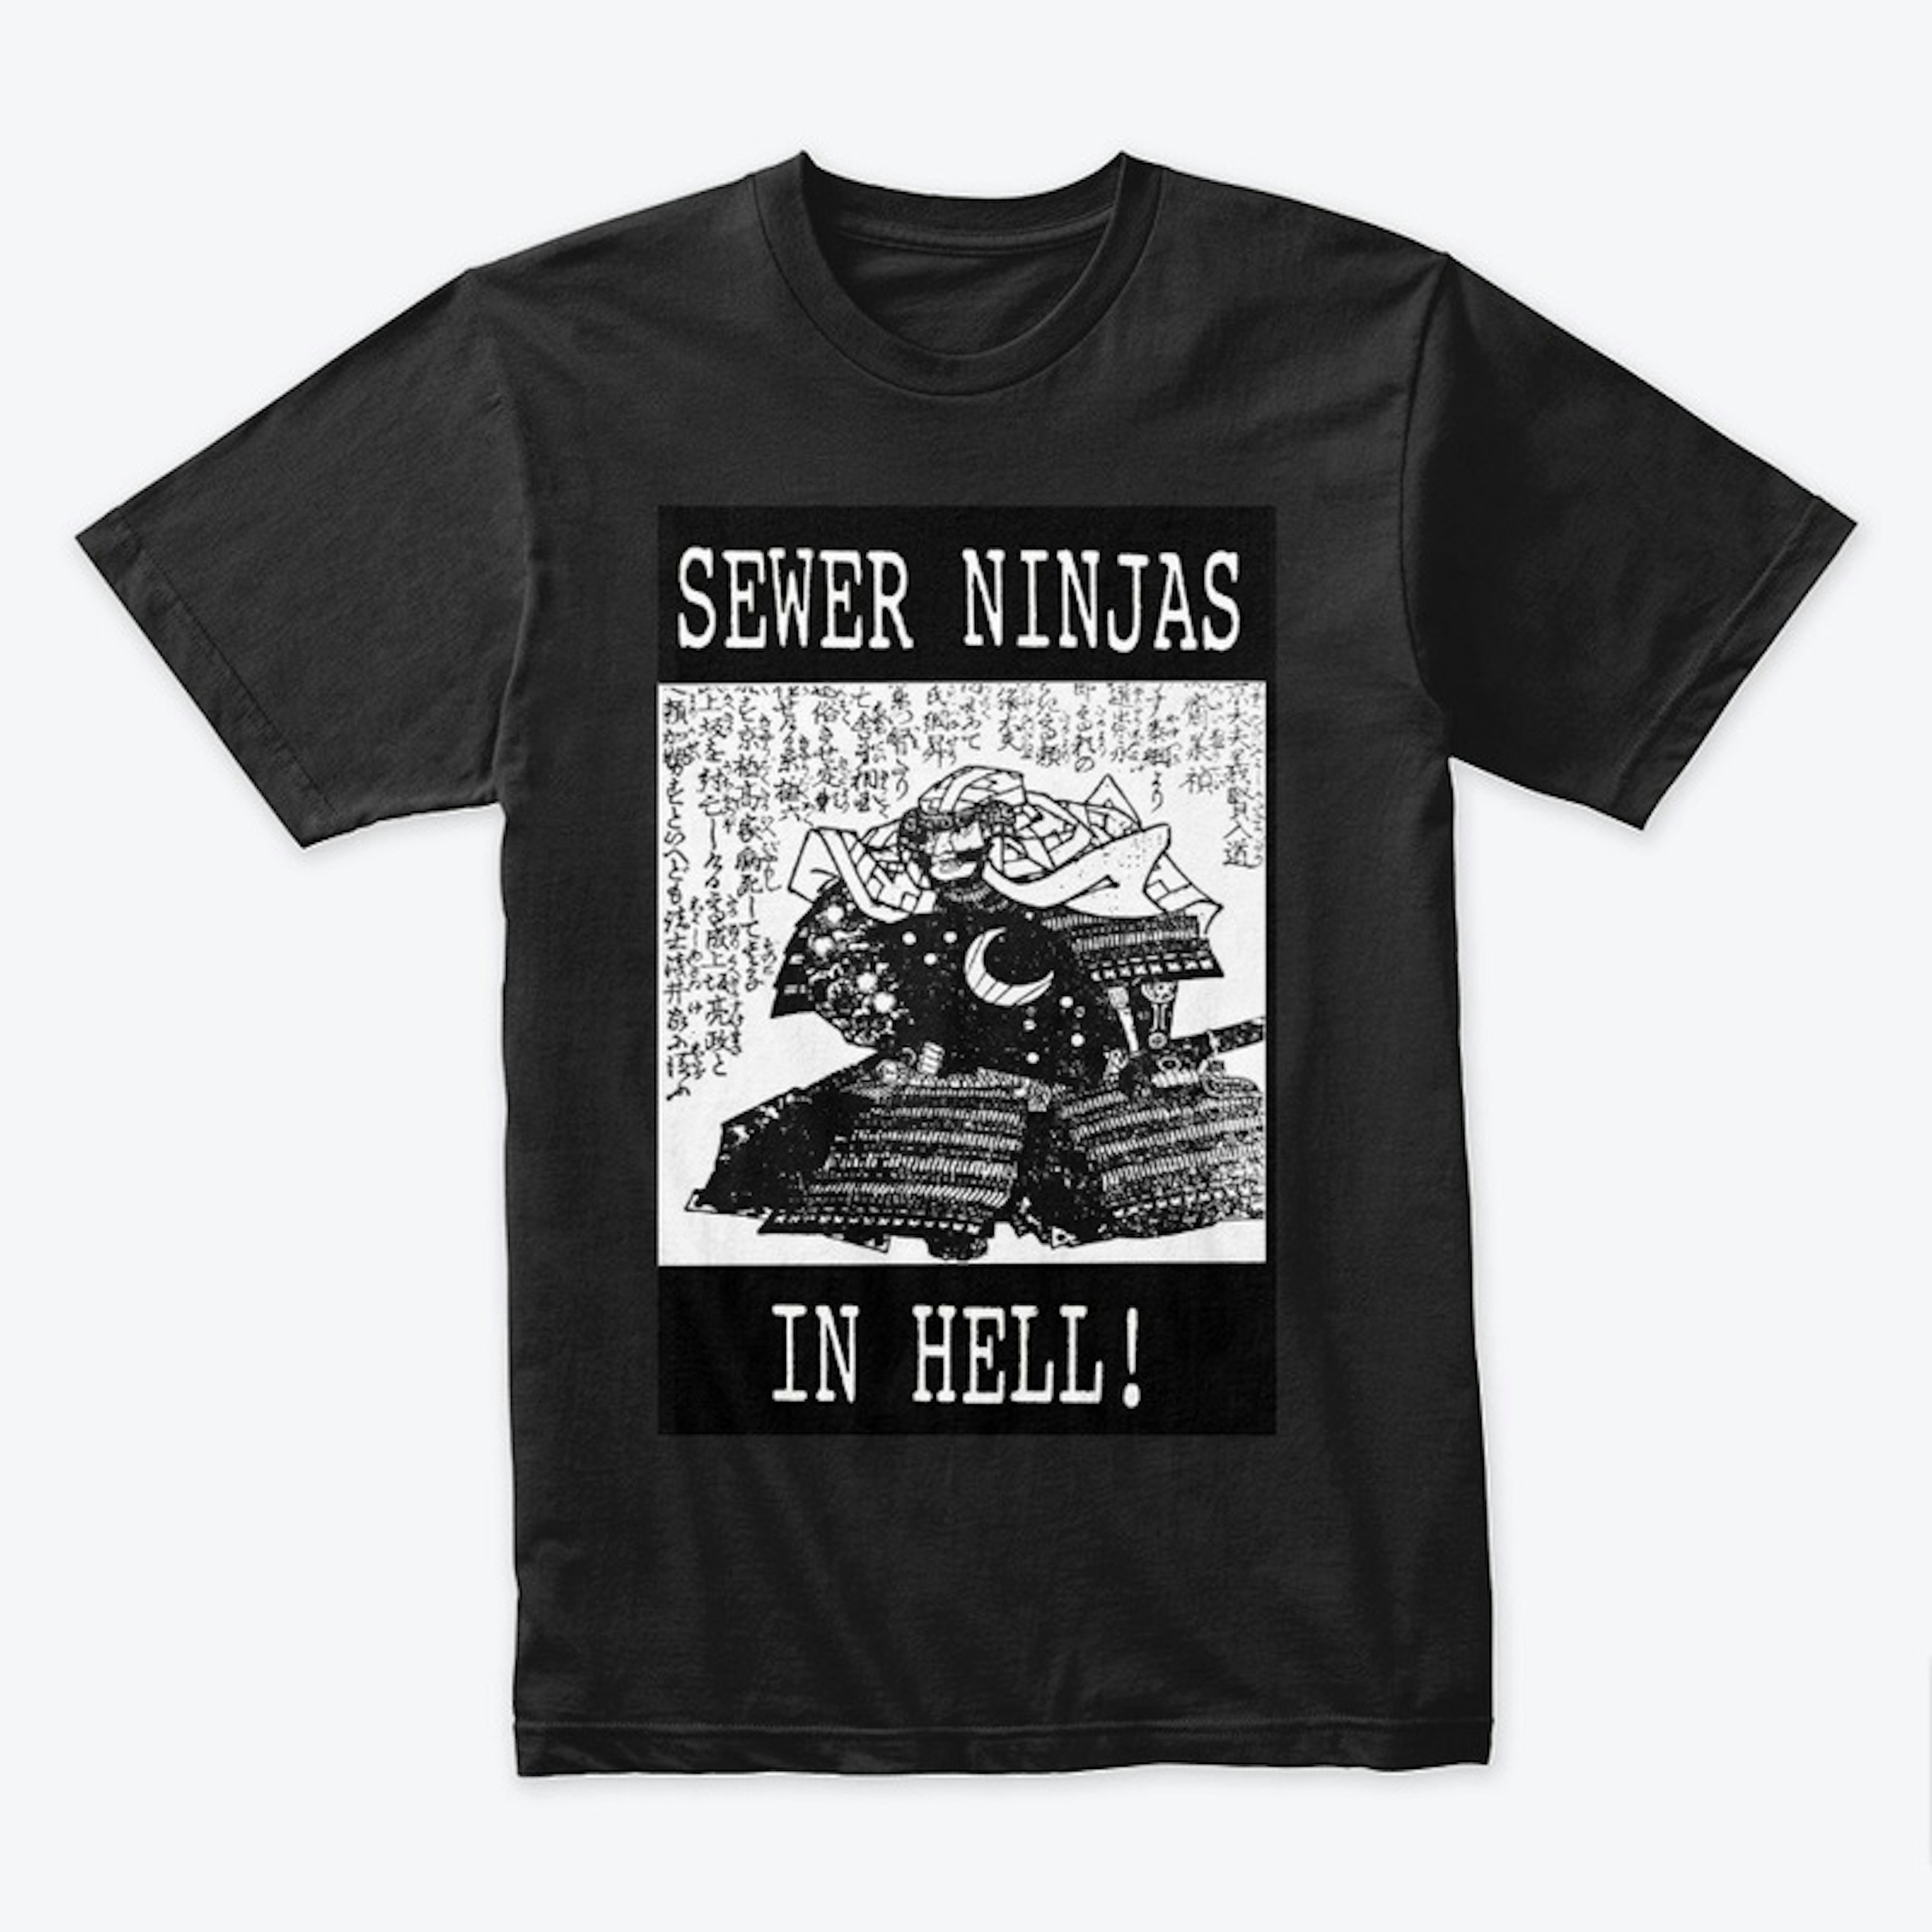 Sewer Ninjas in Hell T-shirt